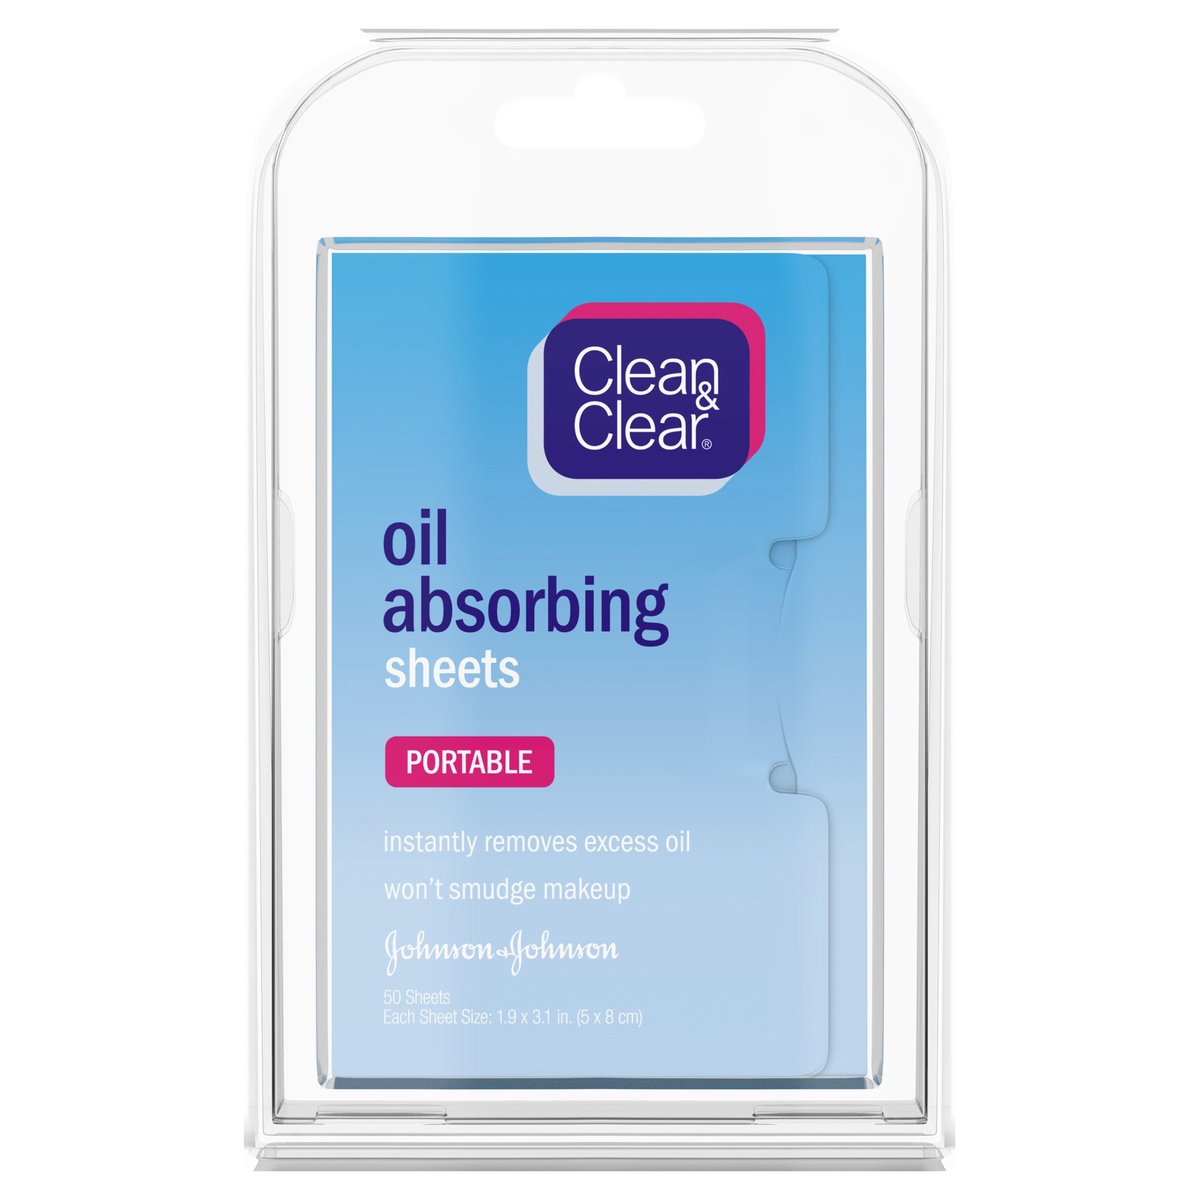 slide 6 of 8, Clean & Clear Oil Absorbing Facial Sheets, Portable Blotting Papers for Face & Nose, Blotting Sheets for Oily Skin to Instantly Remove Excess Oil & Shine, Absorbing Blotting Papers, 50 ct